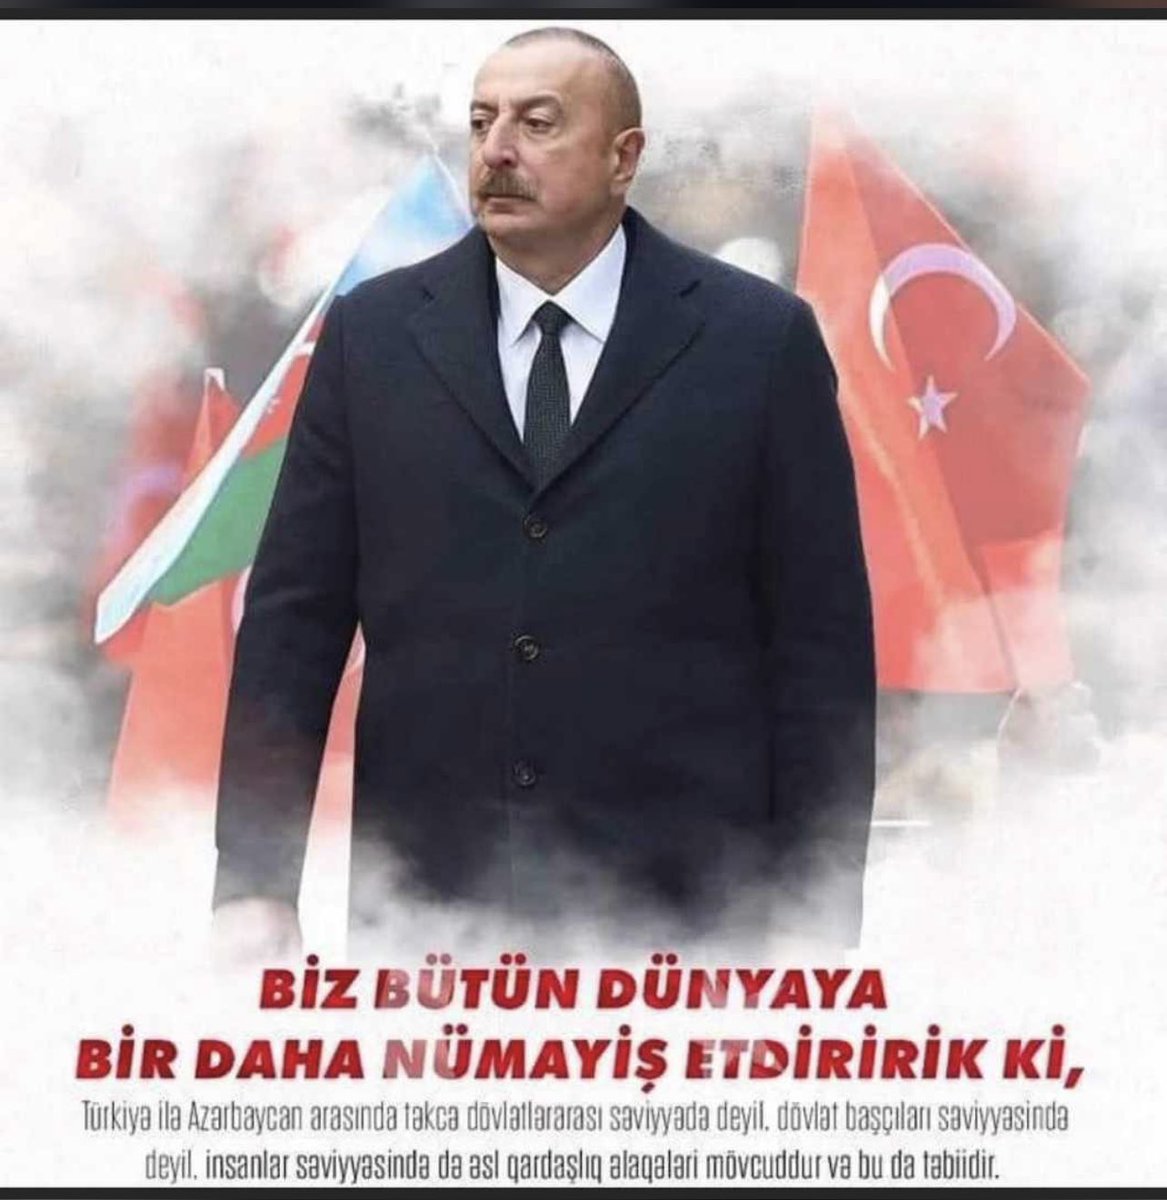 WE SHOW ALL OVER THE WORLD ONCE AGAIN THAT,Relationship  Between #Turkey and #Azerbaijan, not only at the interstate level, not at the level of heads of state,also at the level of people, there are real fraternal relations,and this is natural. #BizBirlikteDahaGüçlüyüz #earthquak